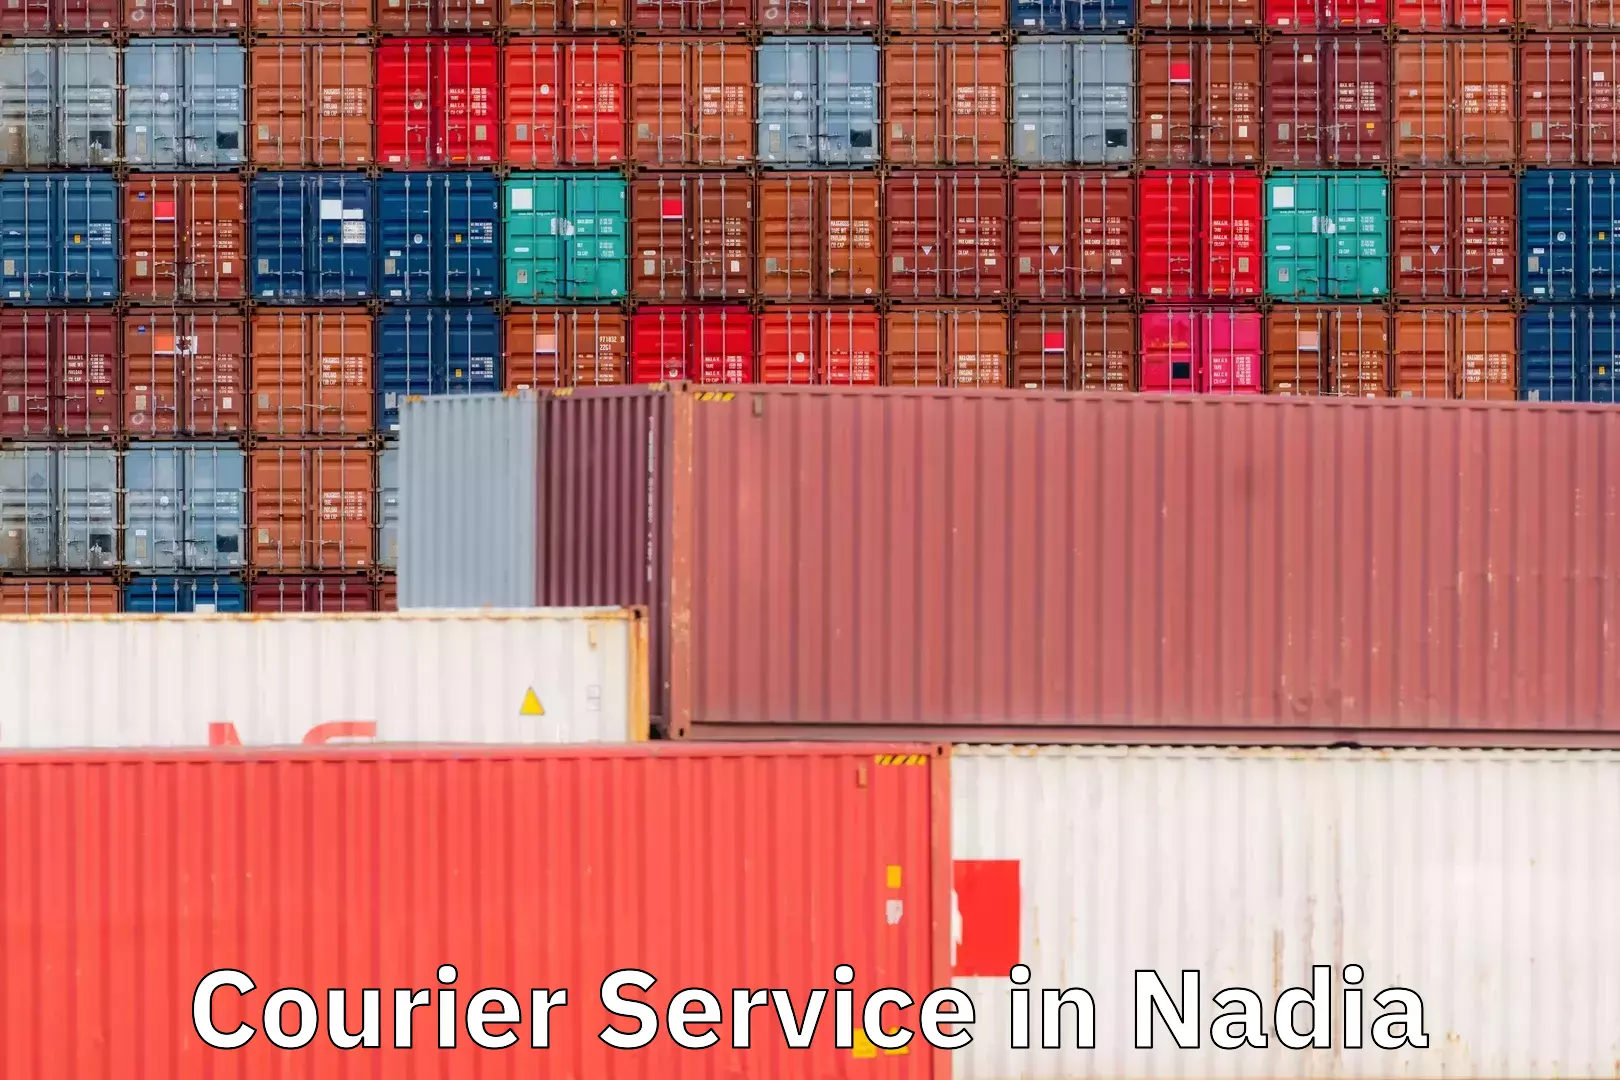 Sustainable shipping practices in Nadia